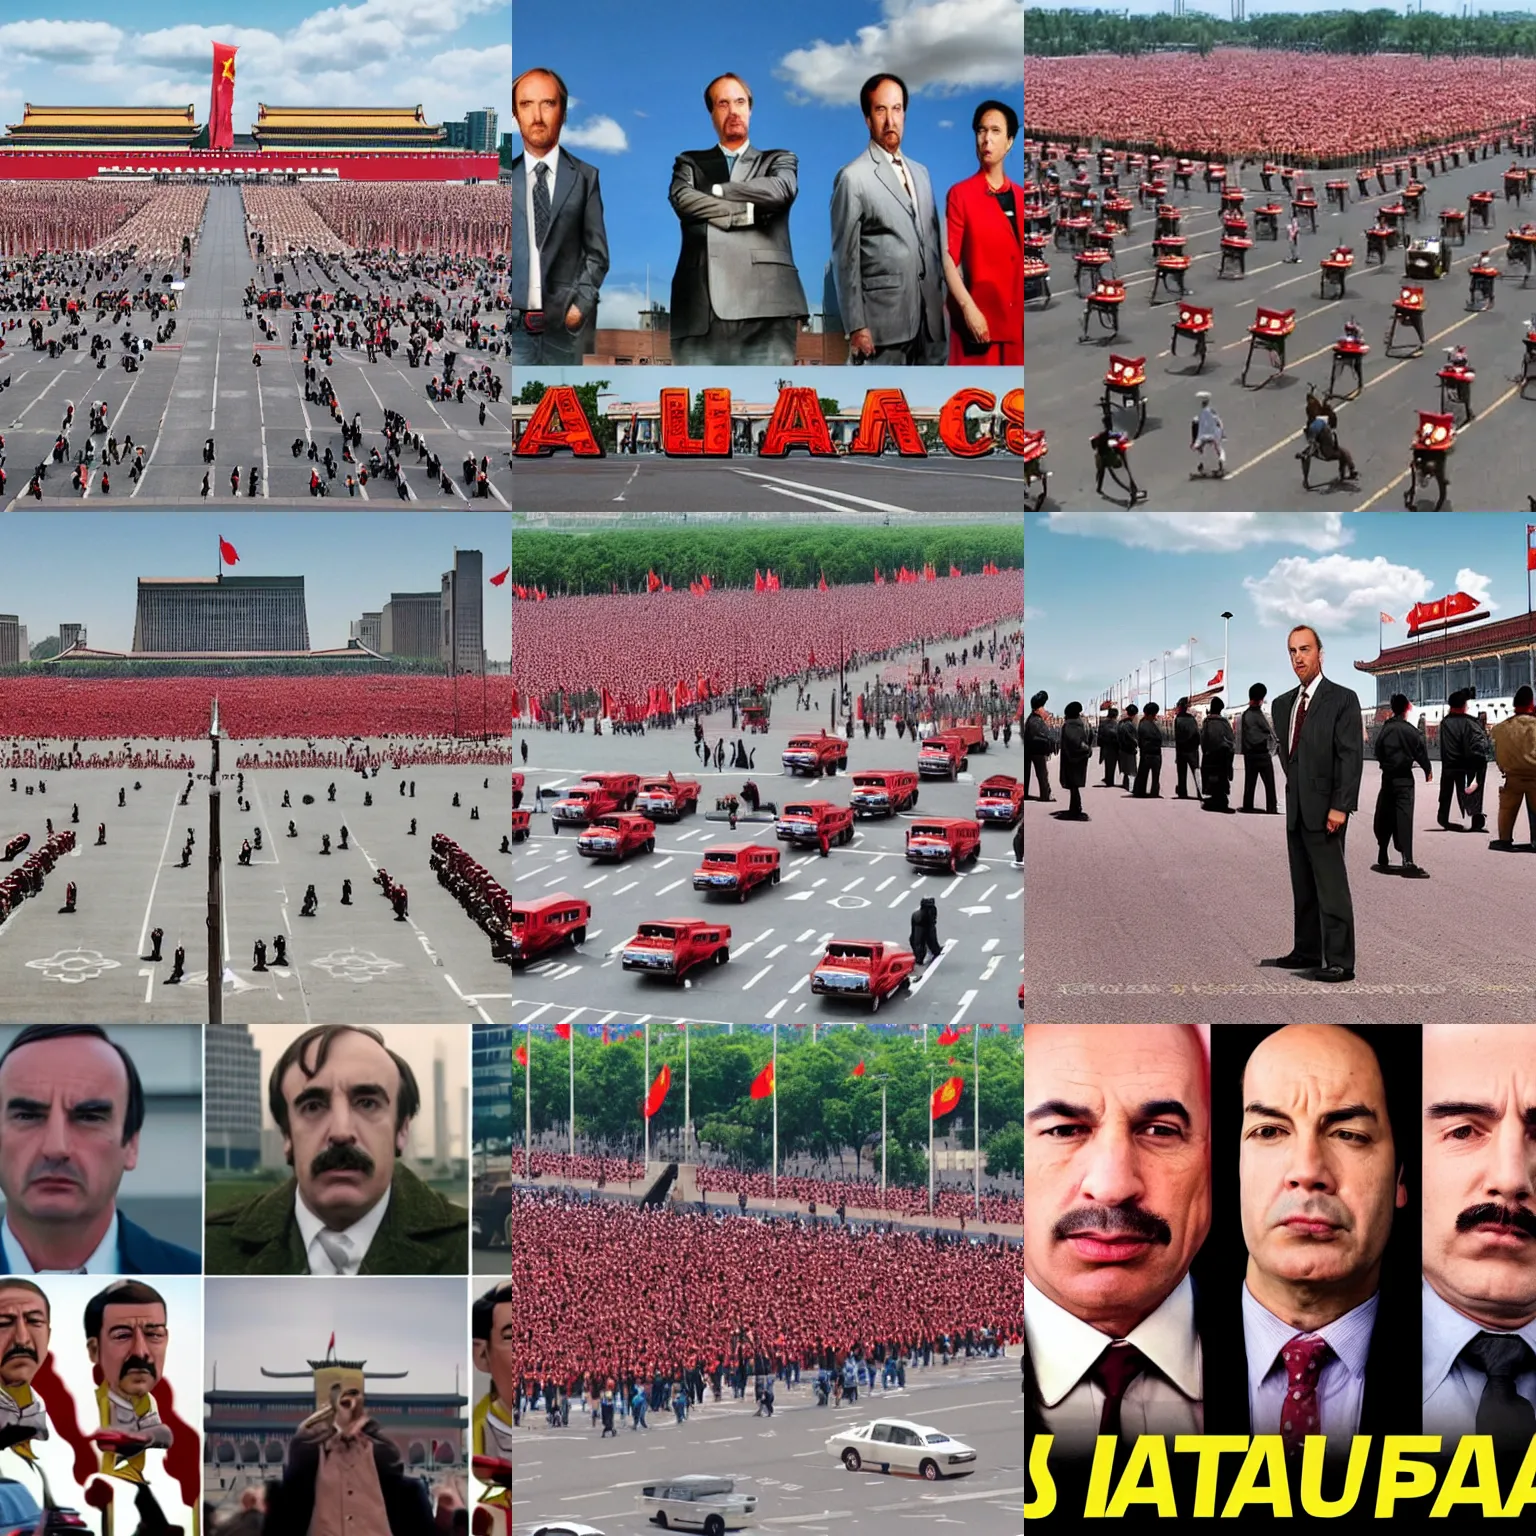 Prompt: tiananmen square but everyone's faces have been replaced by Saul from better call Saul